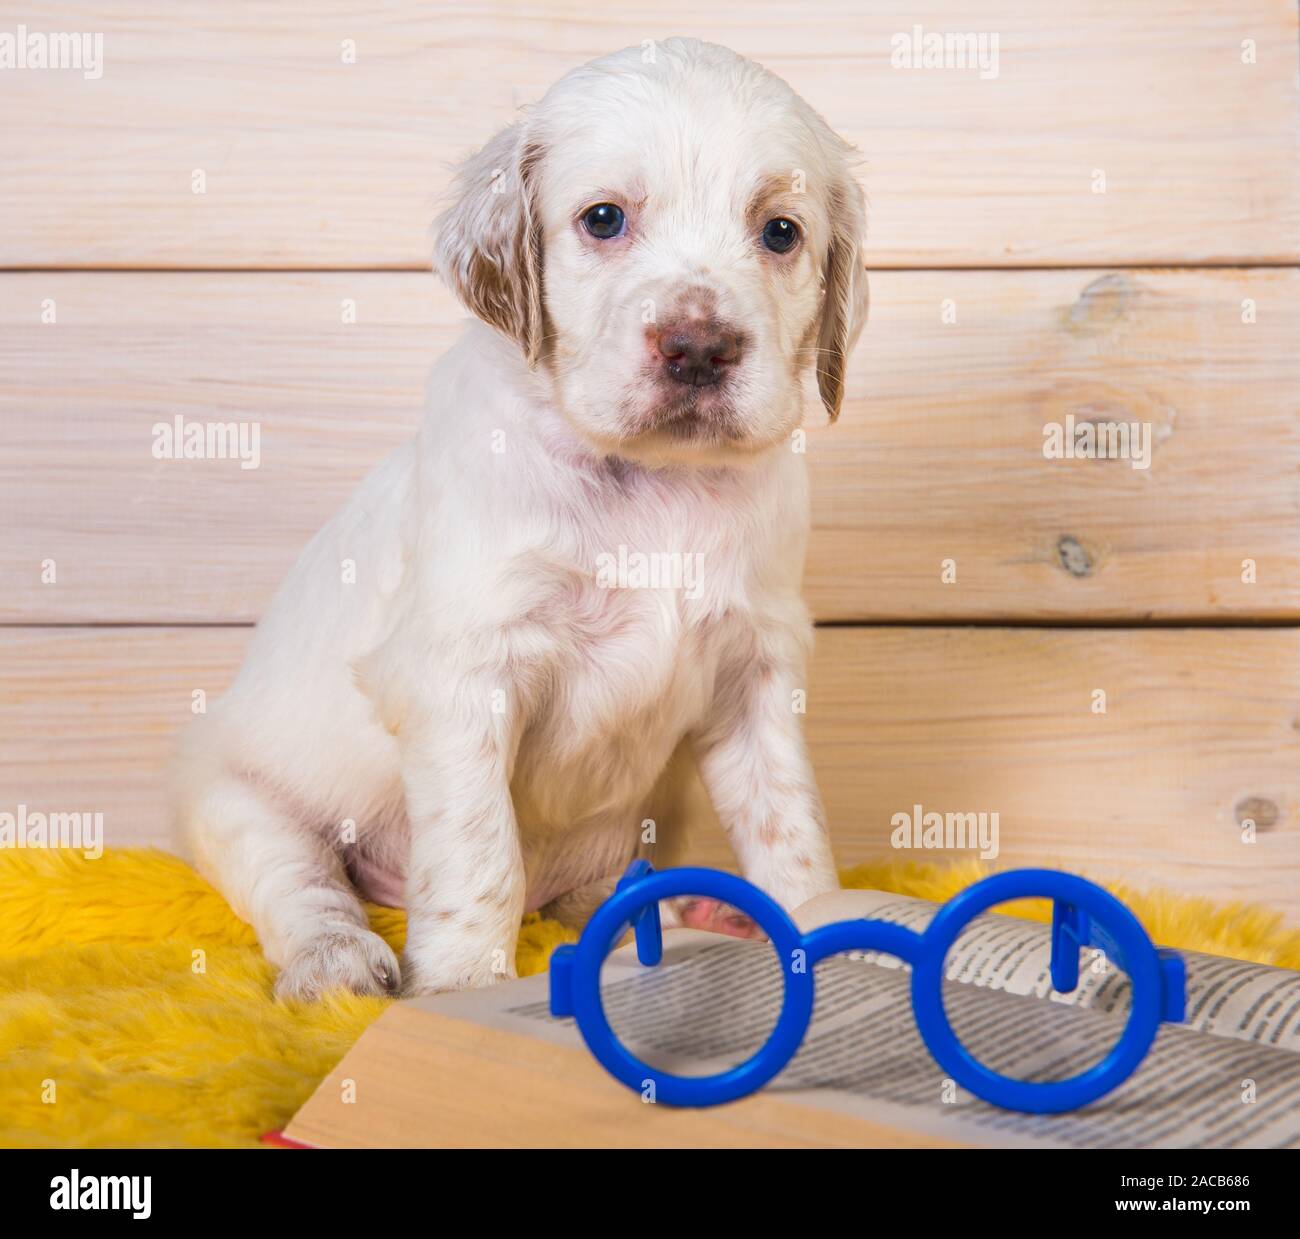 White English setter puppy dog is reading book Stock Photo